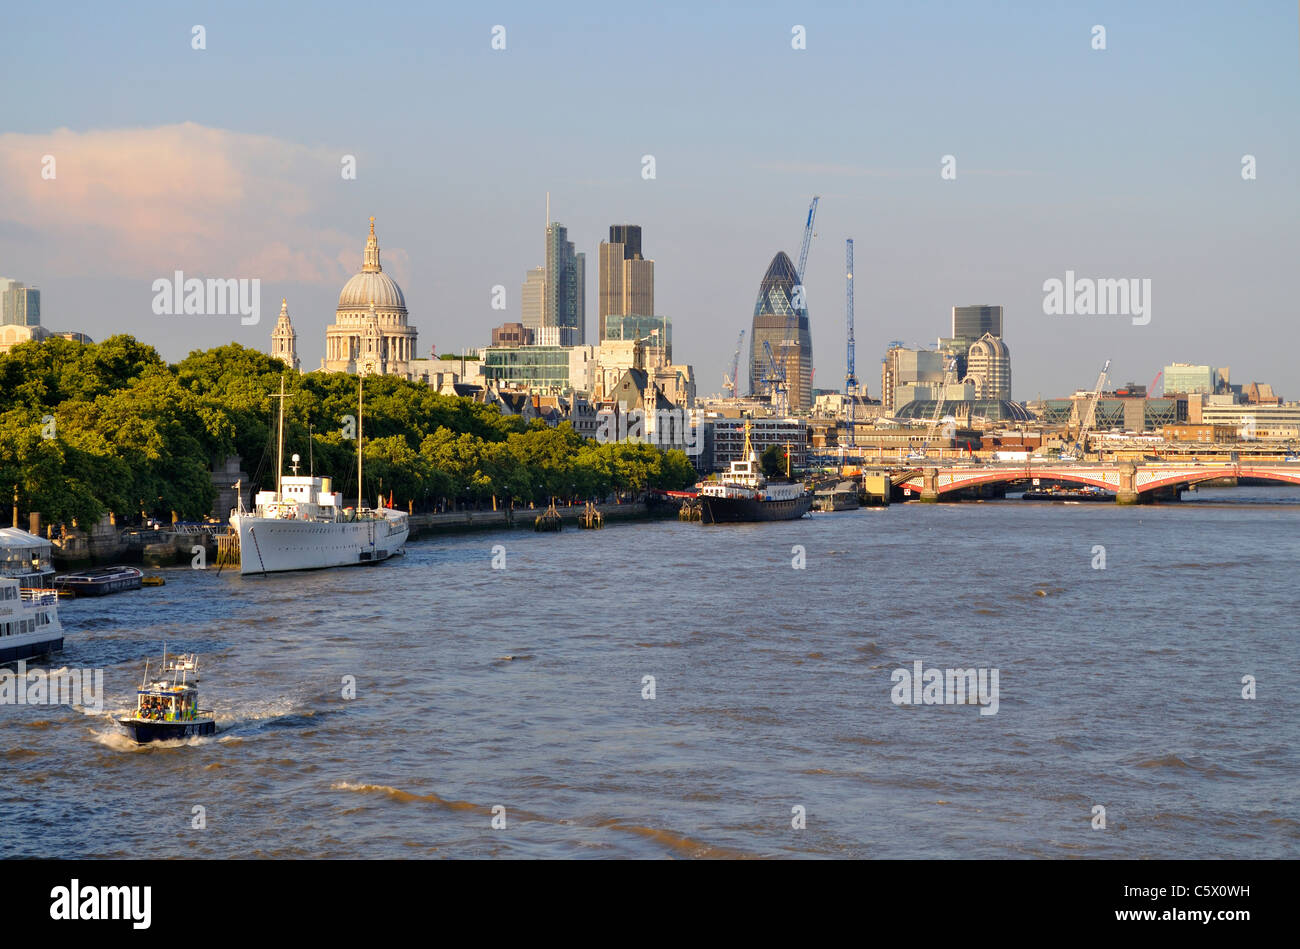 A river police boat making its way down the River Thames past the Victoria Embankment in the City of London Stock Photo